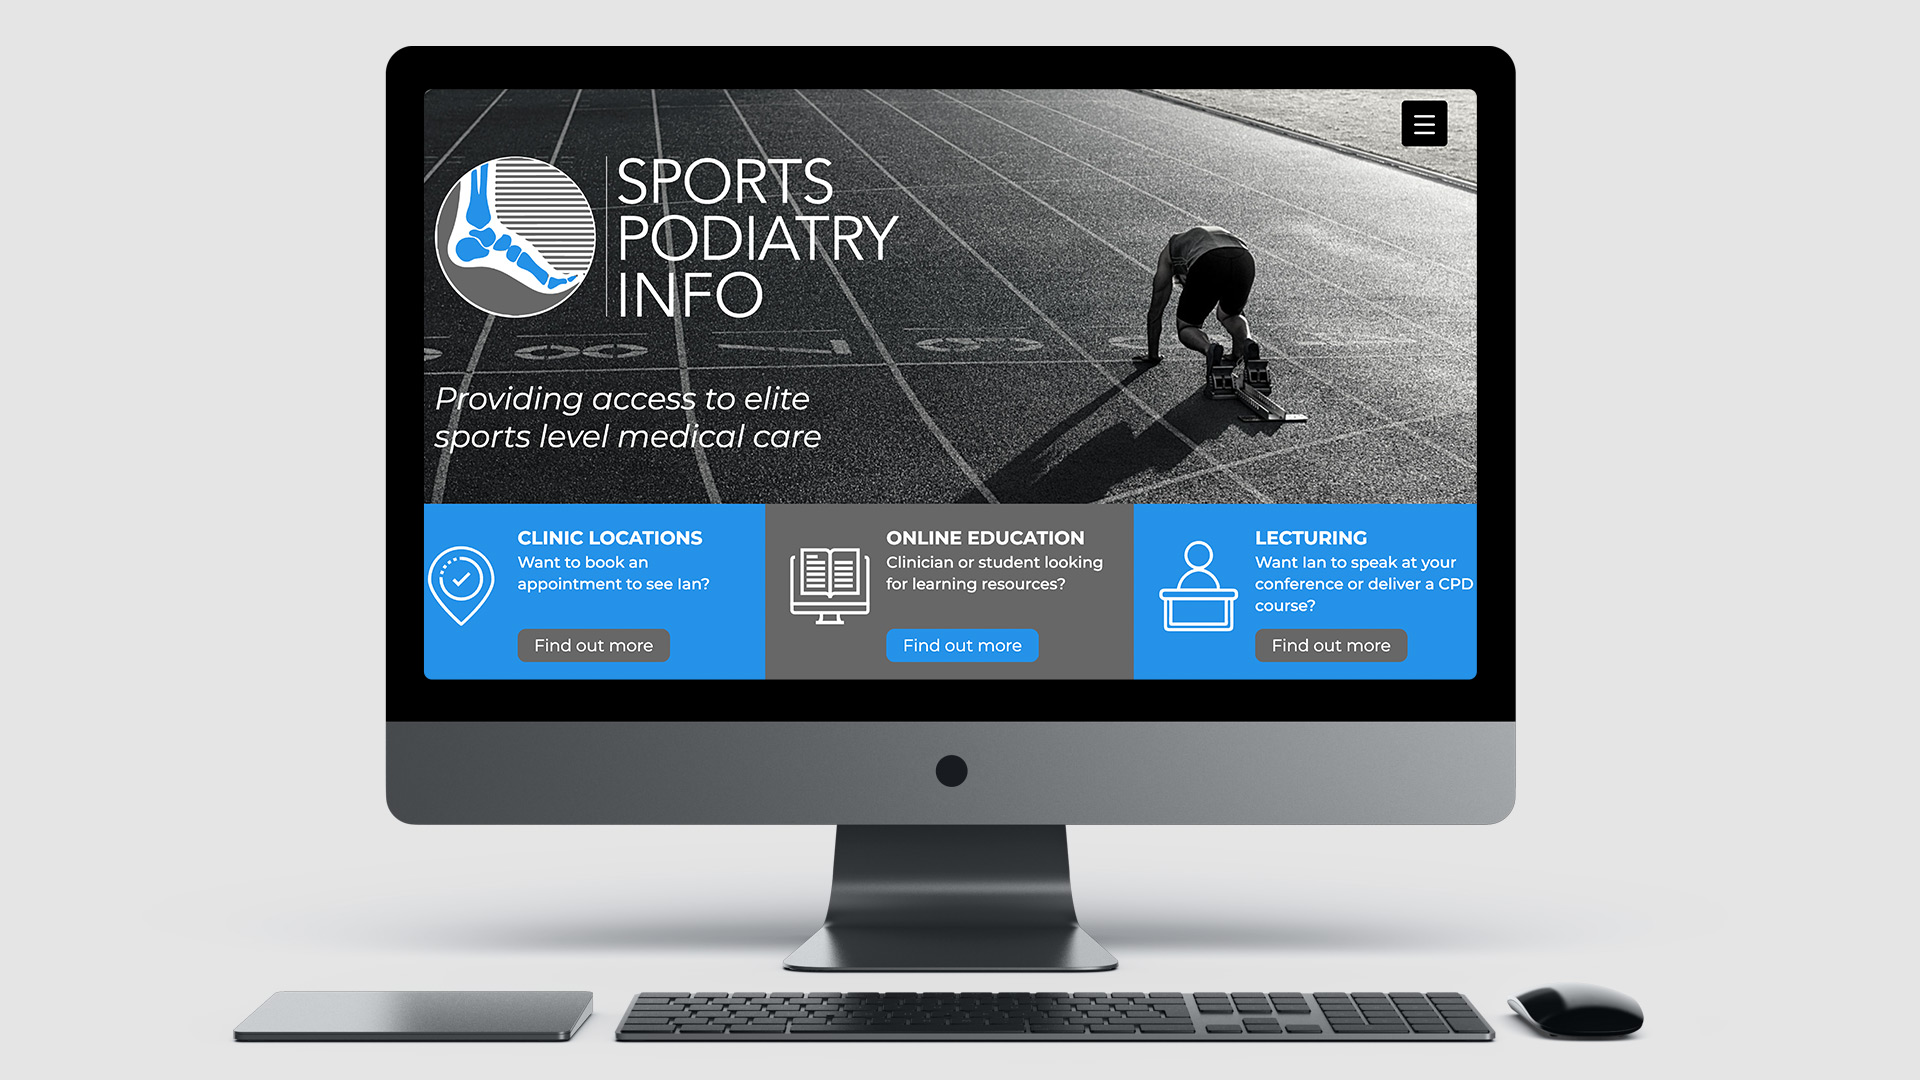 Sports Podiatry Info website design and build